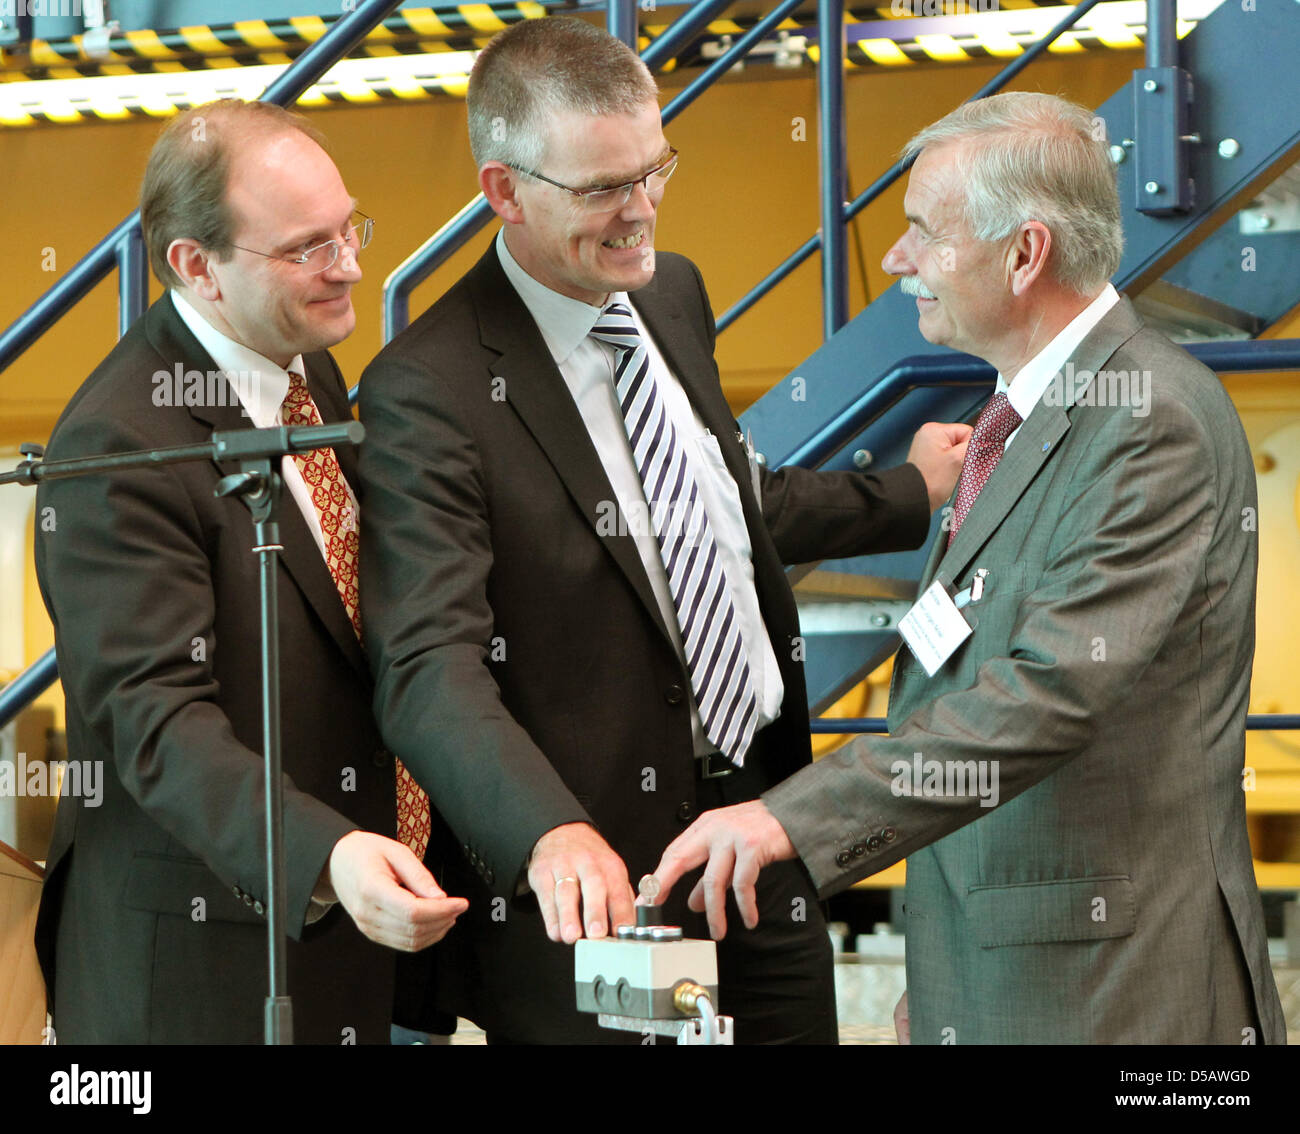 Economic Minister of Mecklenburg West-Pomerania, Juergen Seidel (R), presses a button that starts a diesel engine in a test bed in Rostock, Germany, 26 June 2010. Accompanying him are Dirk Jebsen (C), production manager of Caterpillar Kiel and Rostock, and Richard Case (L), Vice President of Caterpillar Marine and Petroleum Power Division. Caterpillar Motors Rostock celebrates its  Stock Photo